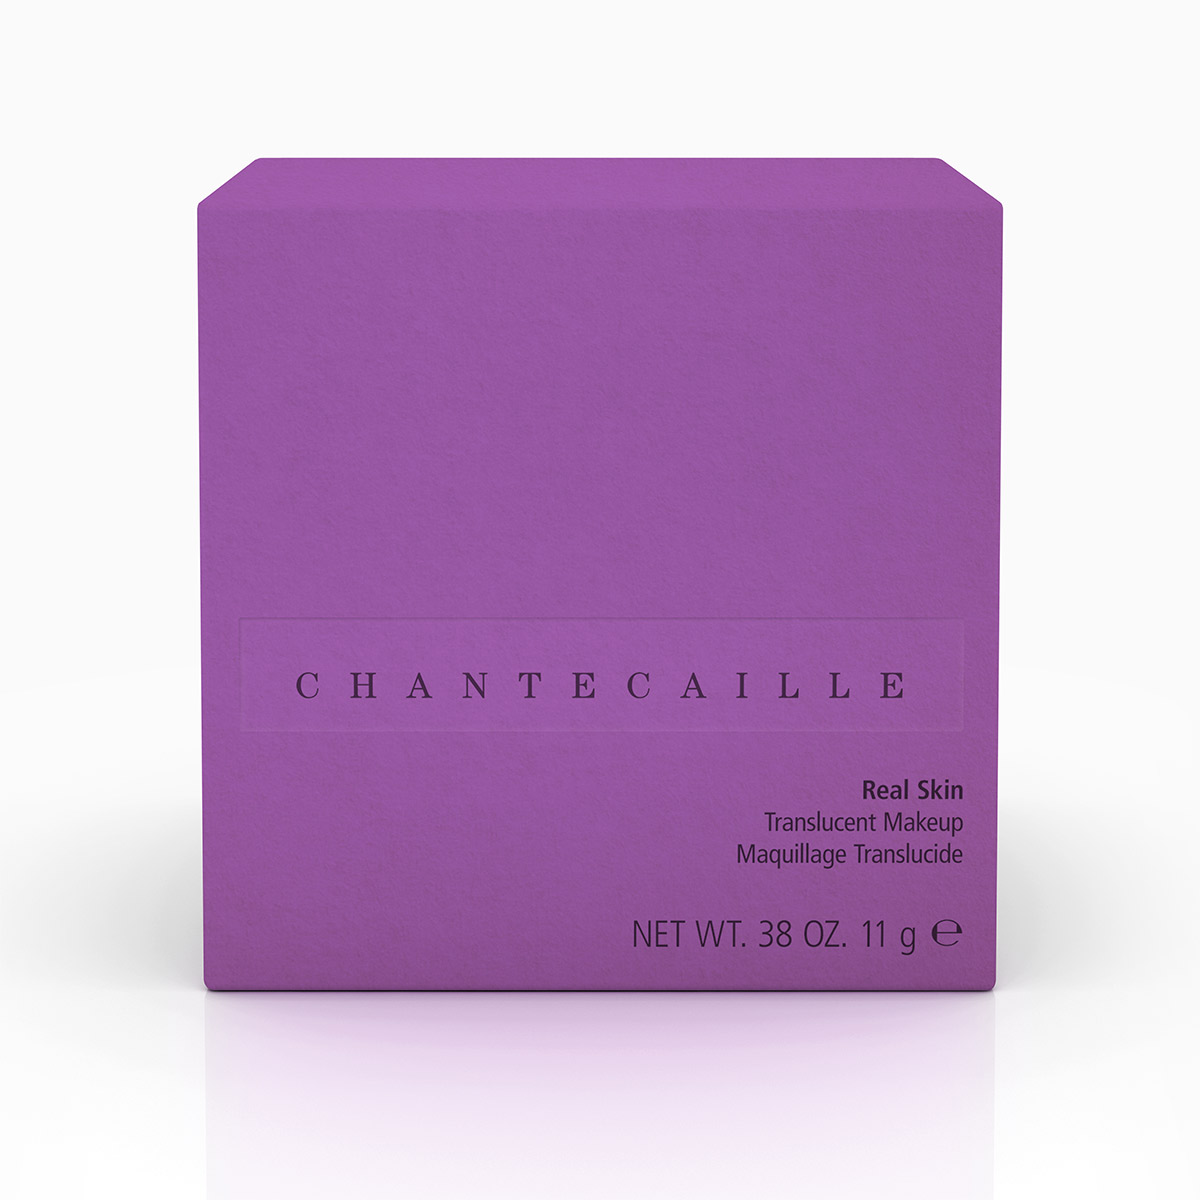 Chantecaille Cosmetics Secondary Packaging